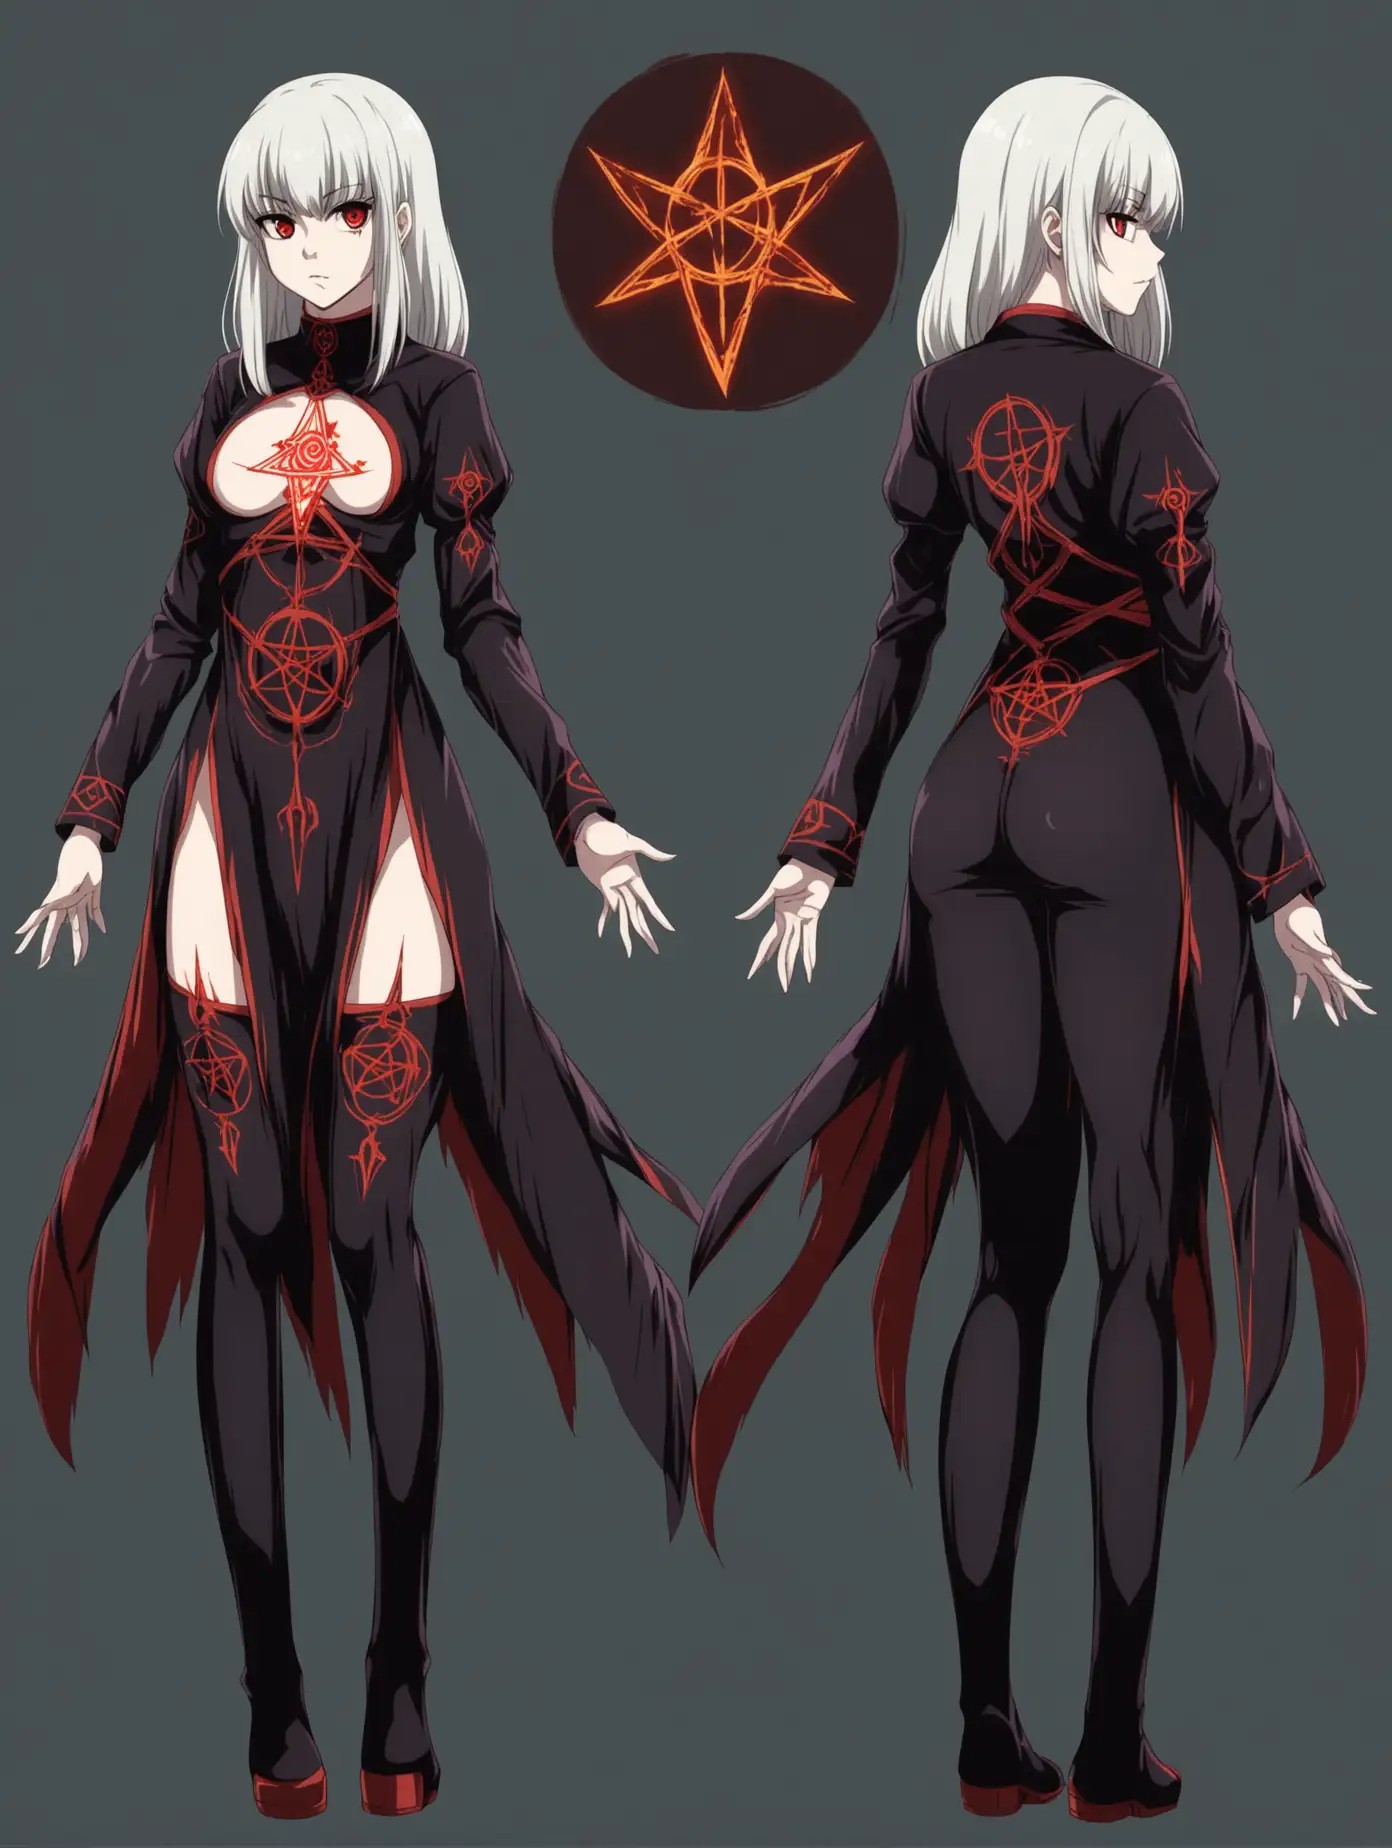 Hot anime girl, in 2 poses full body with front and back view, occultist